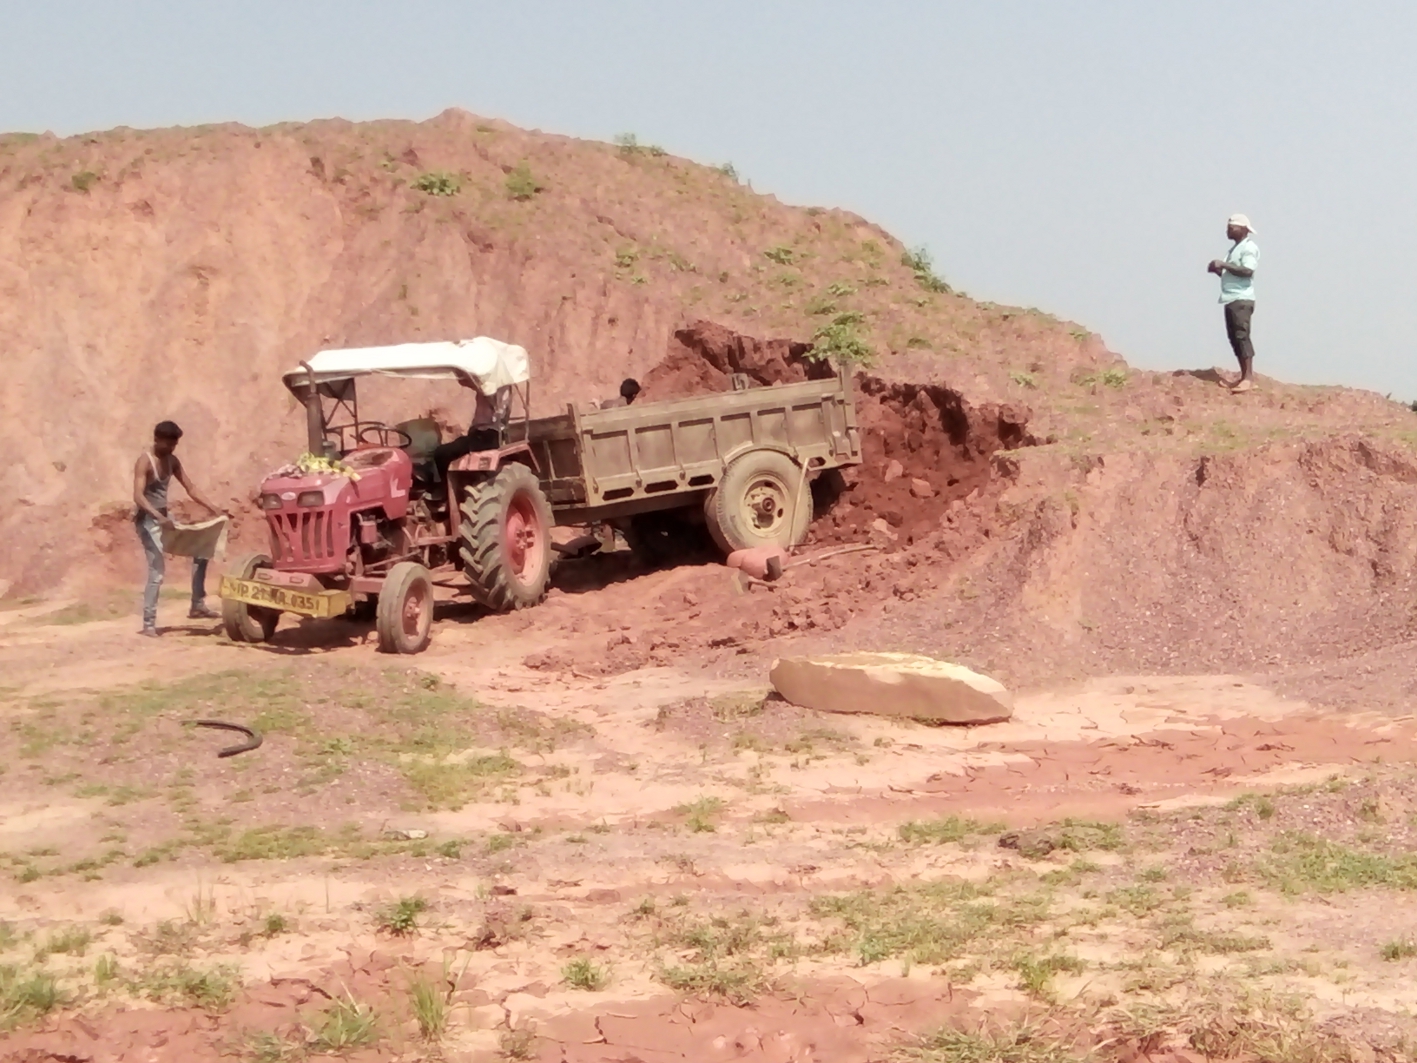 Negligence in removing the clay pile